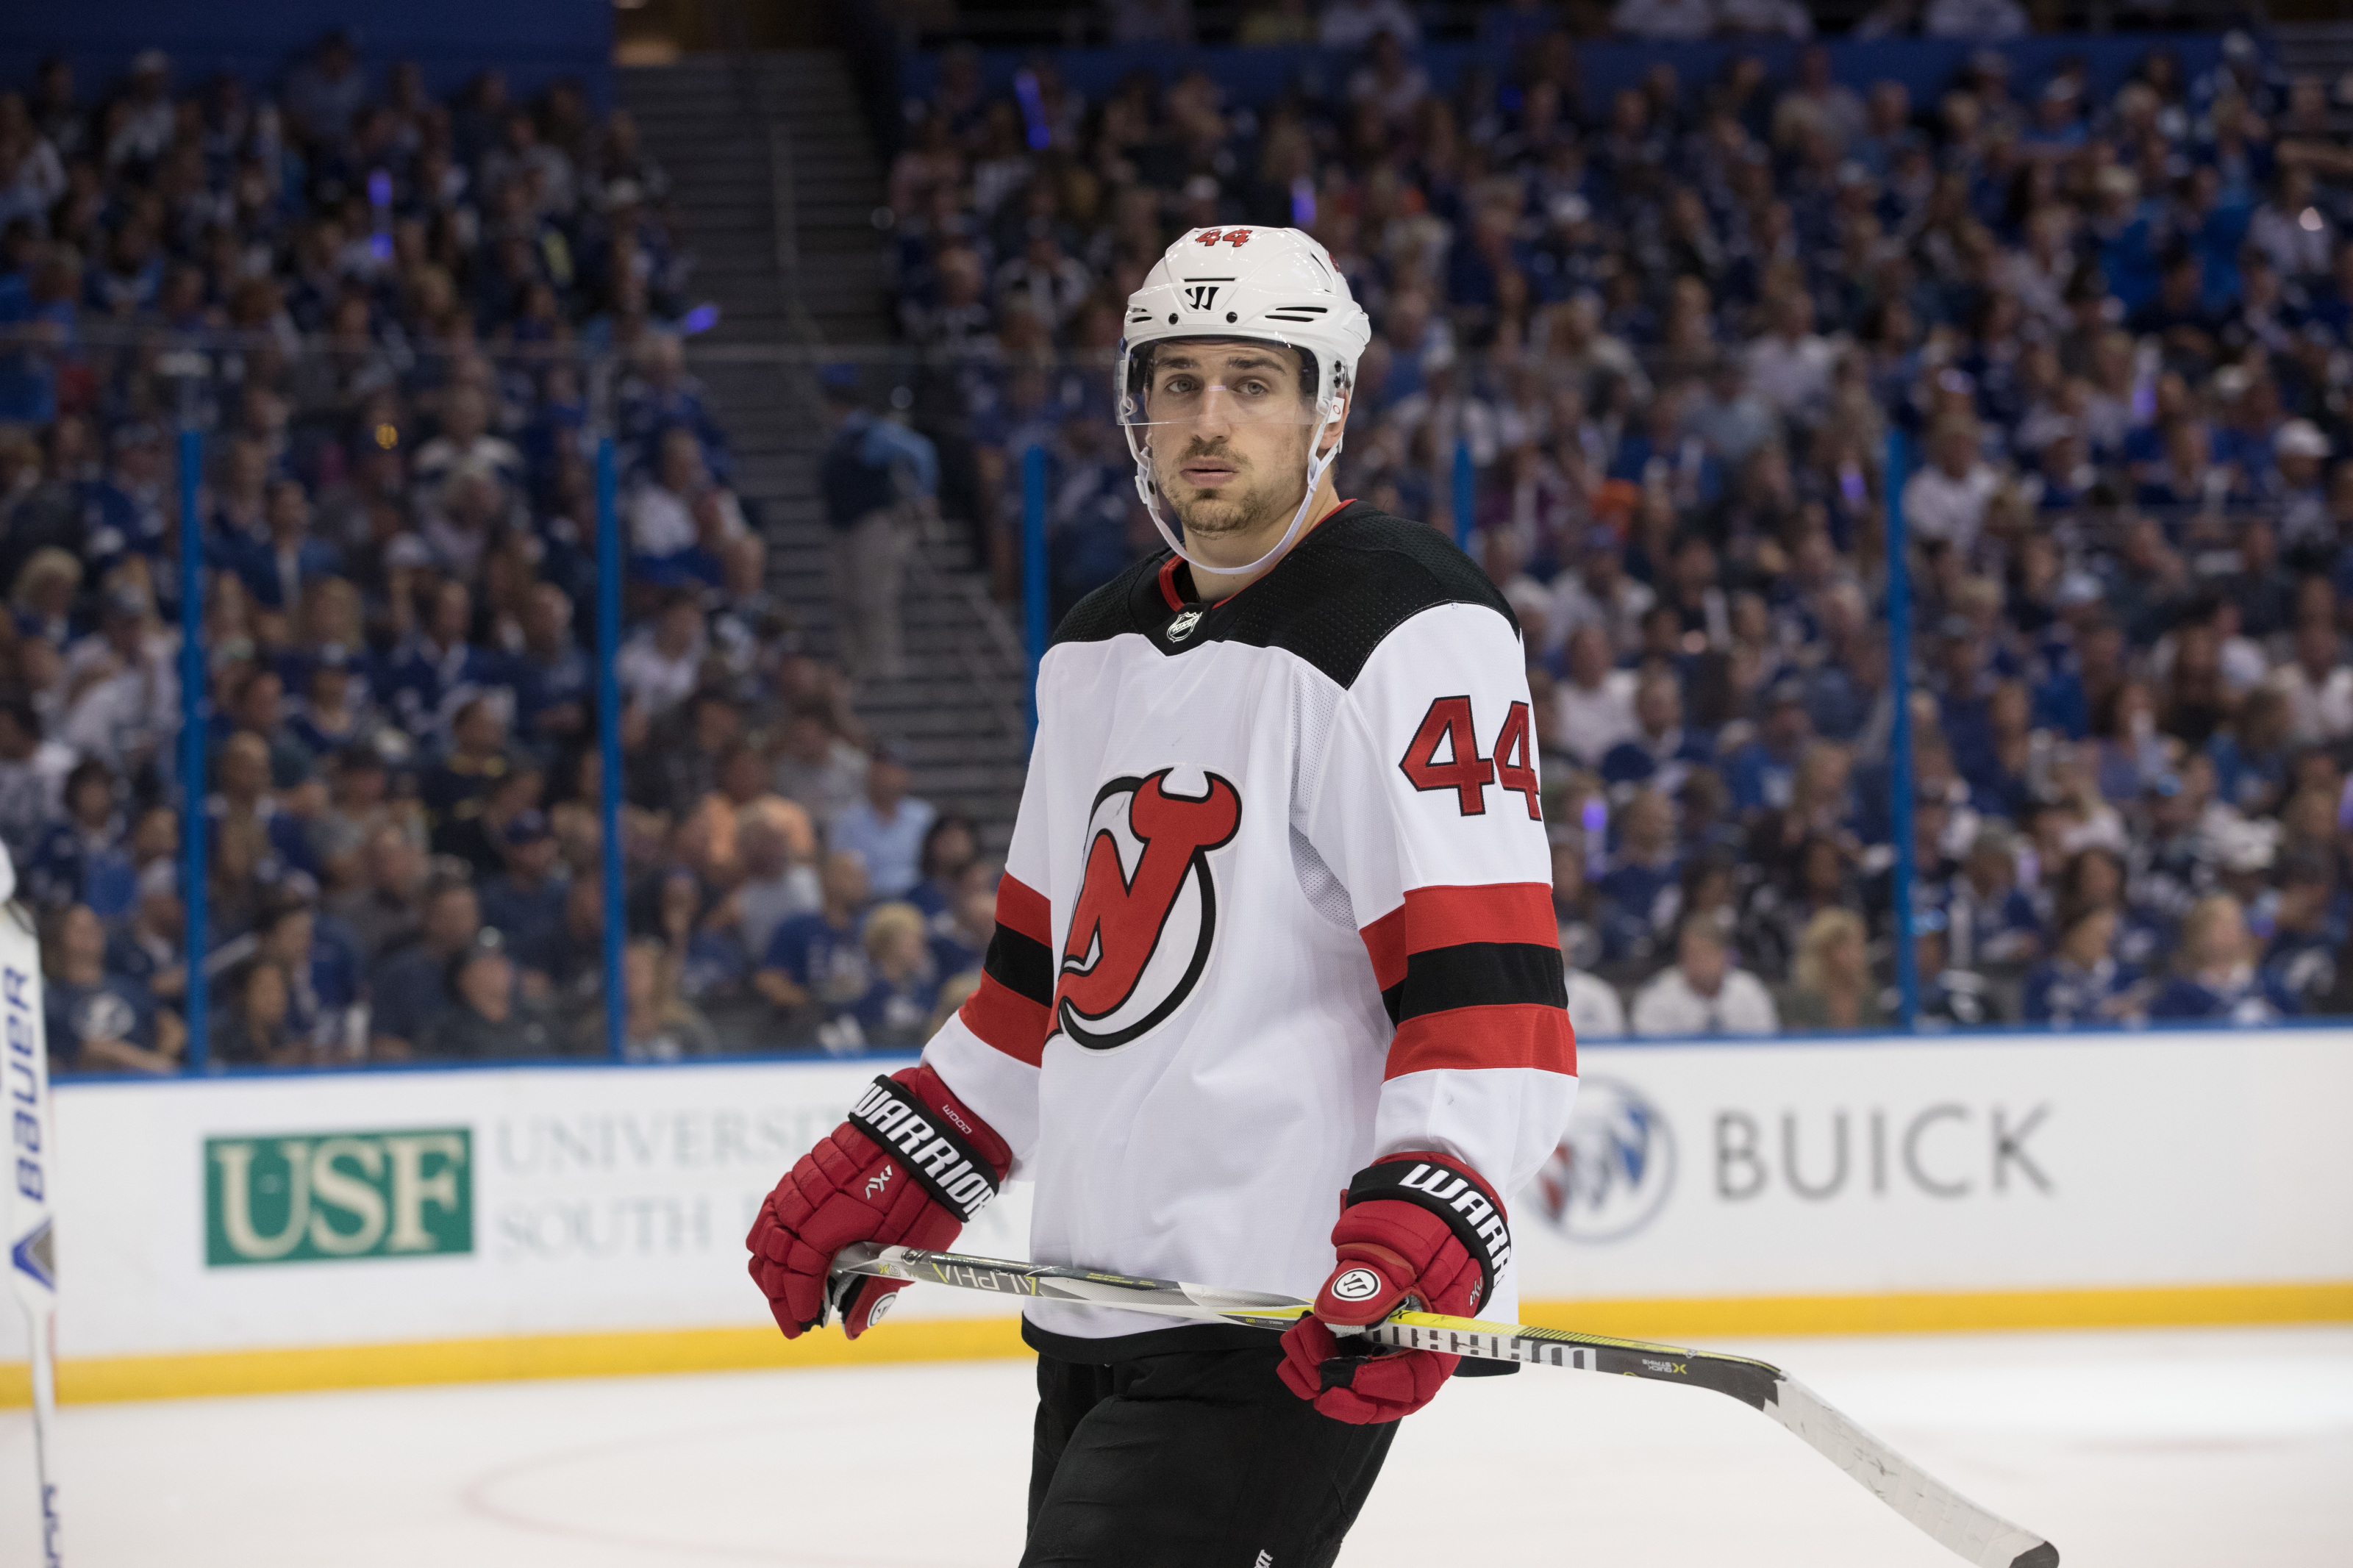 New Jersey Devils At A Crossroads With Miles Wood